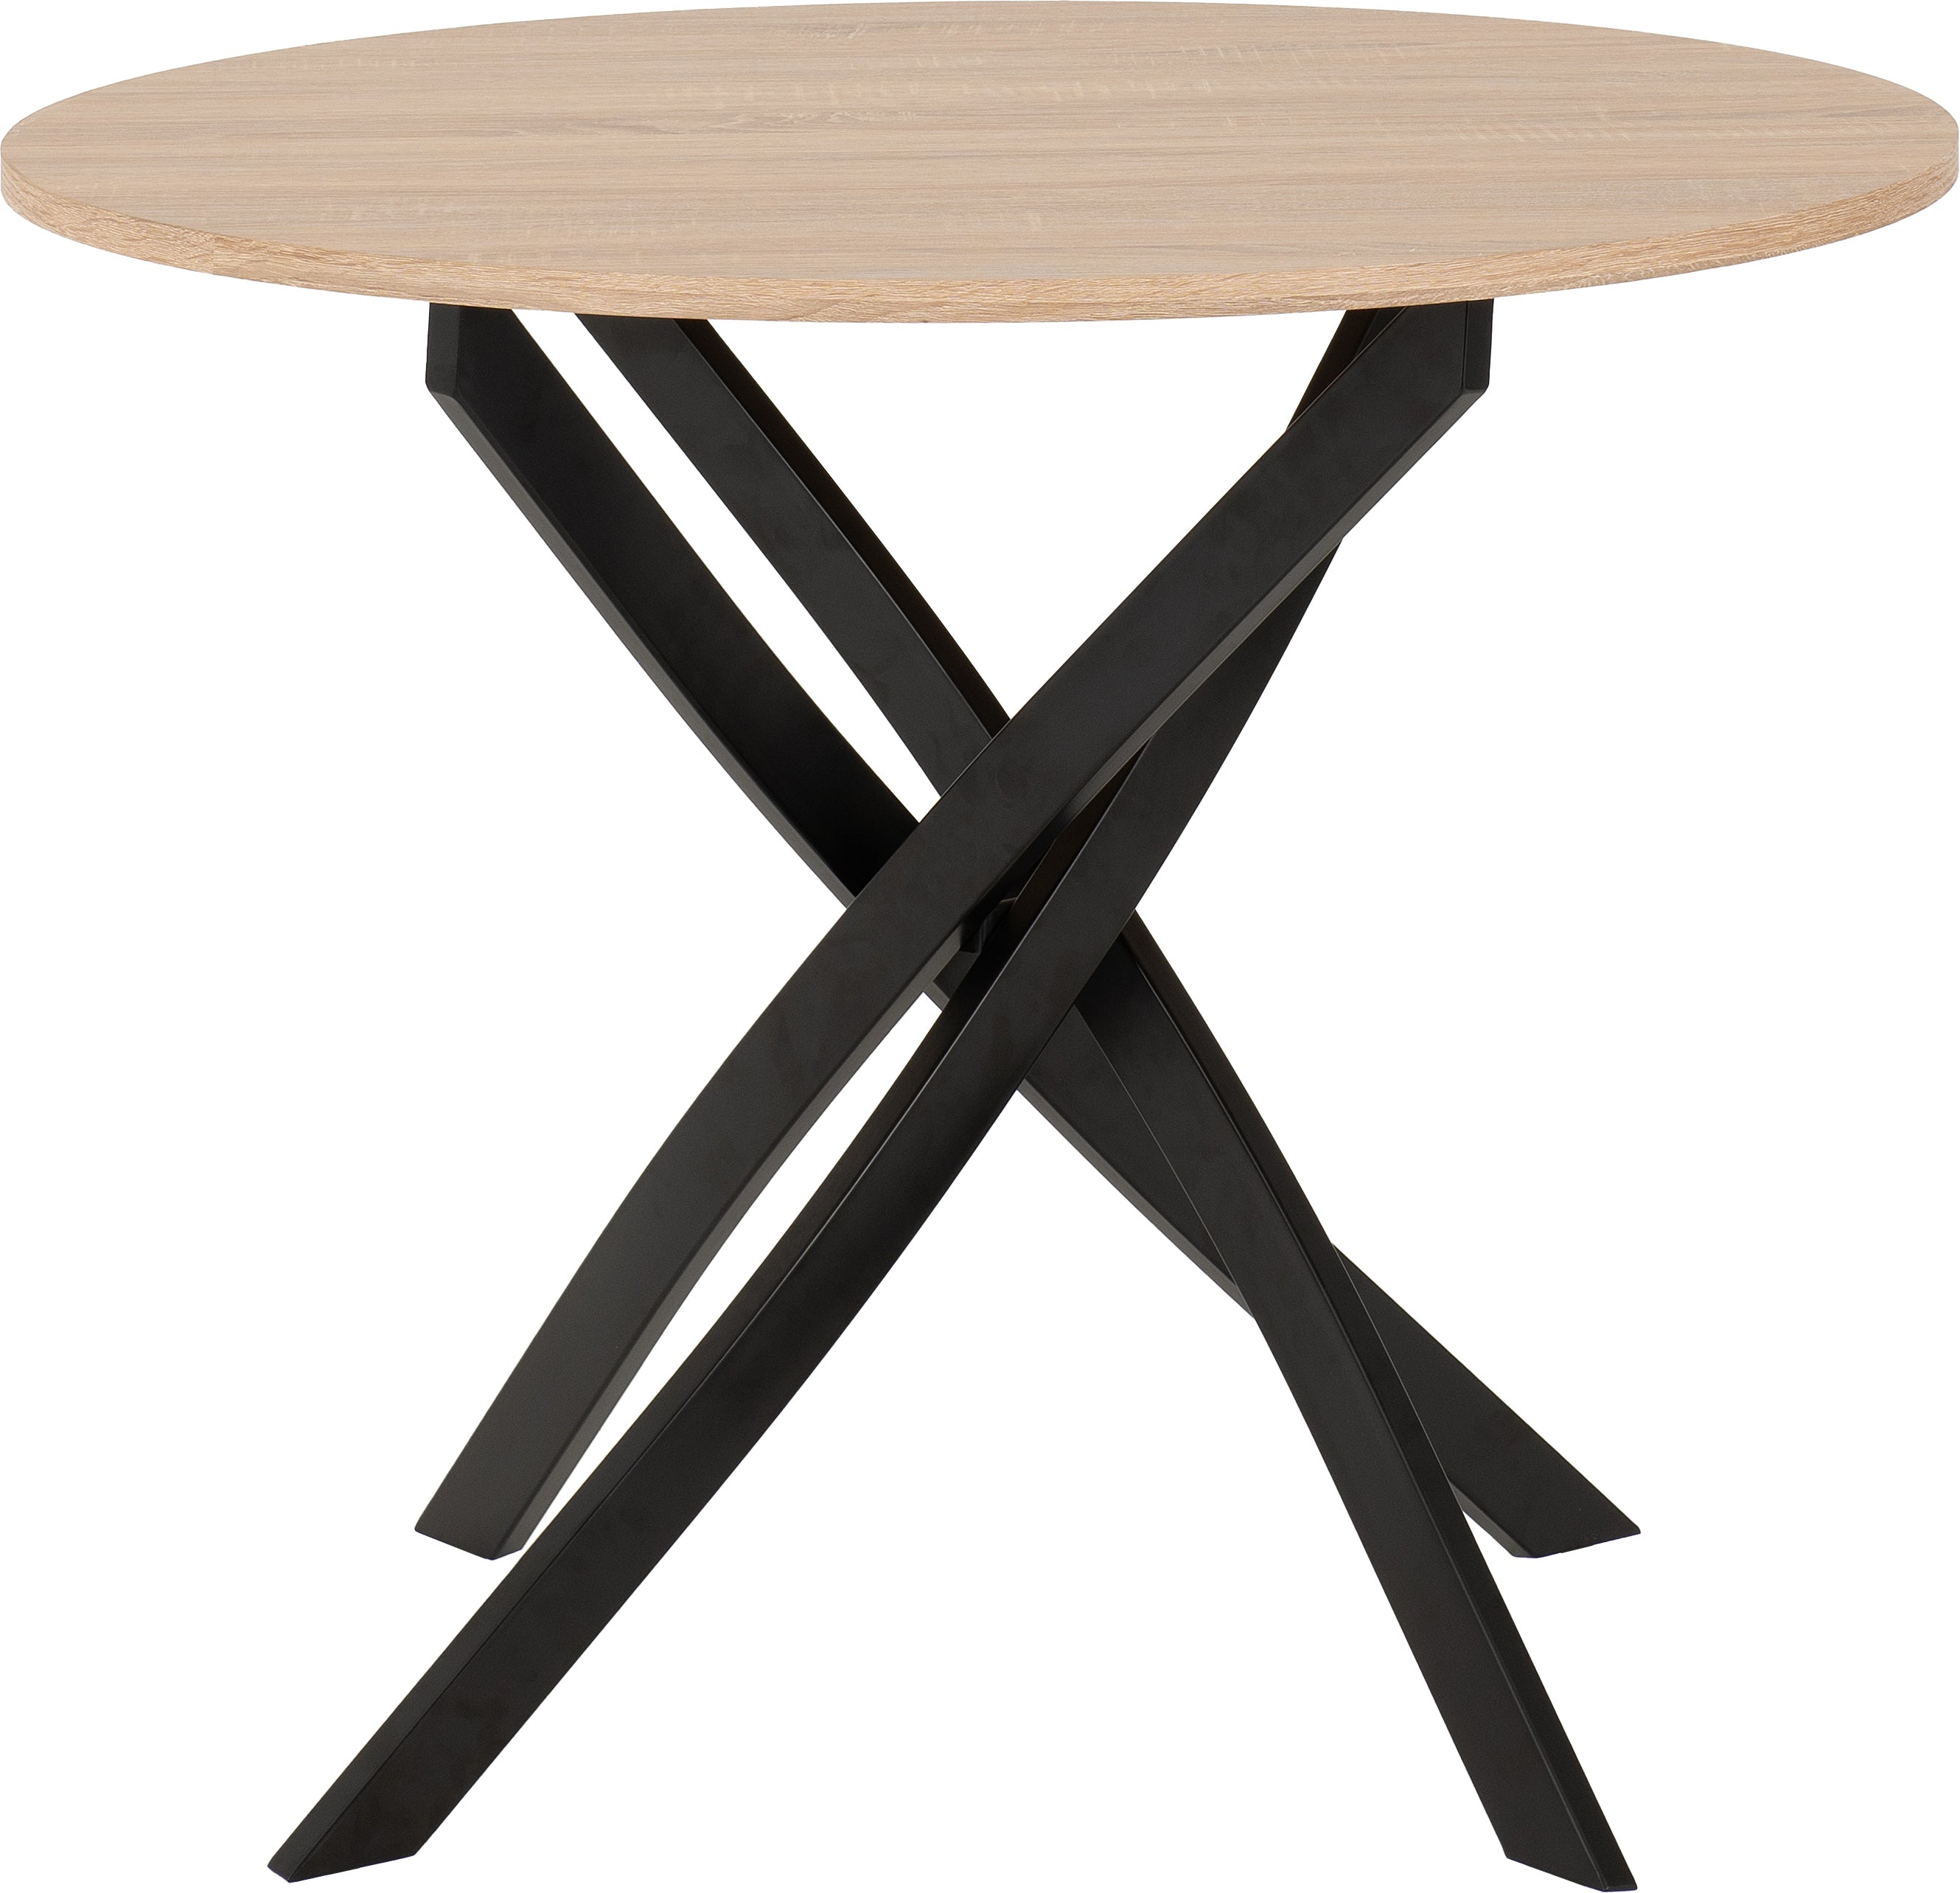 Sheldon Round Wooden Top Dining Table